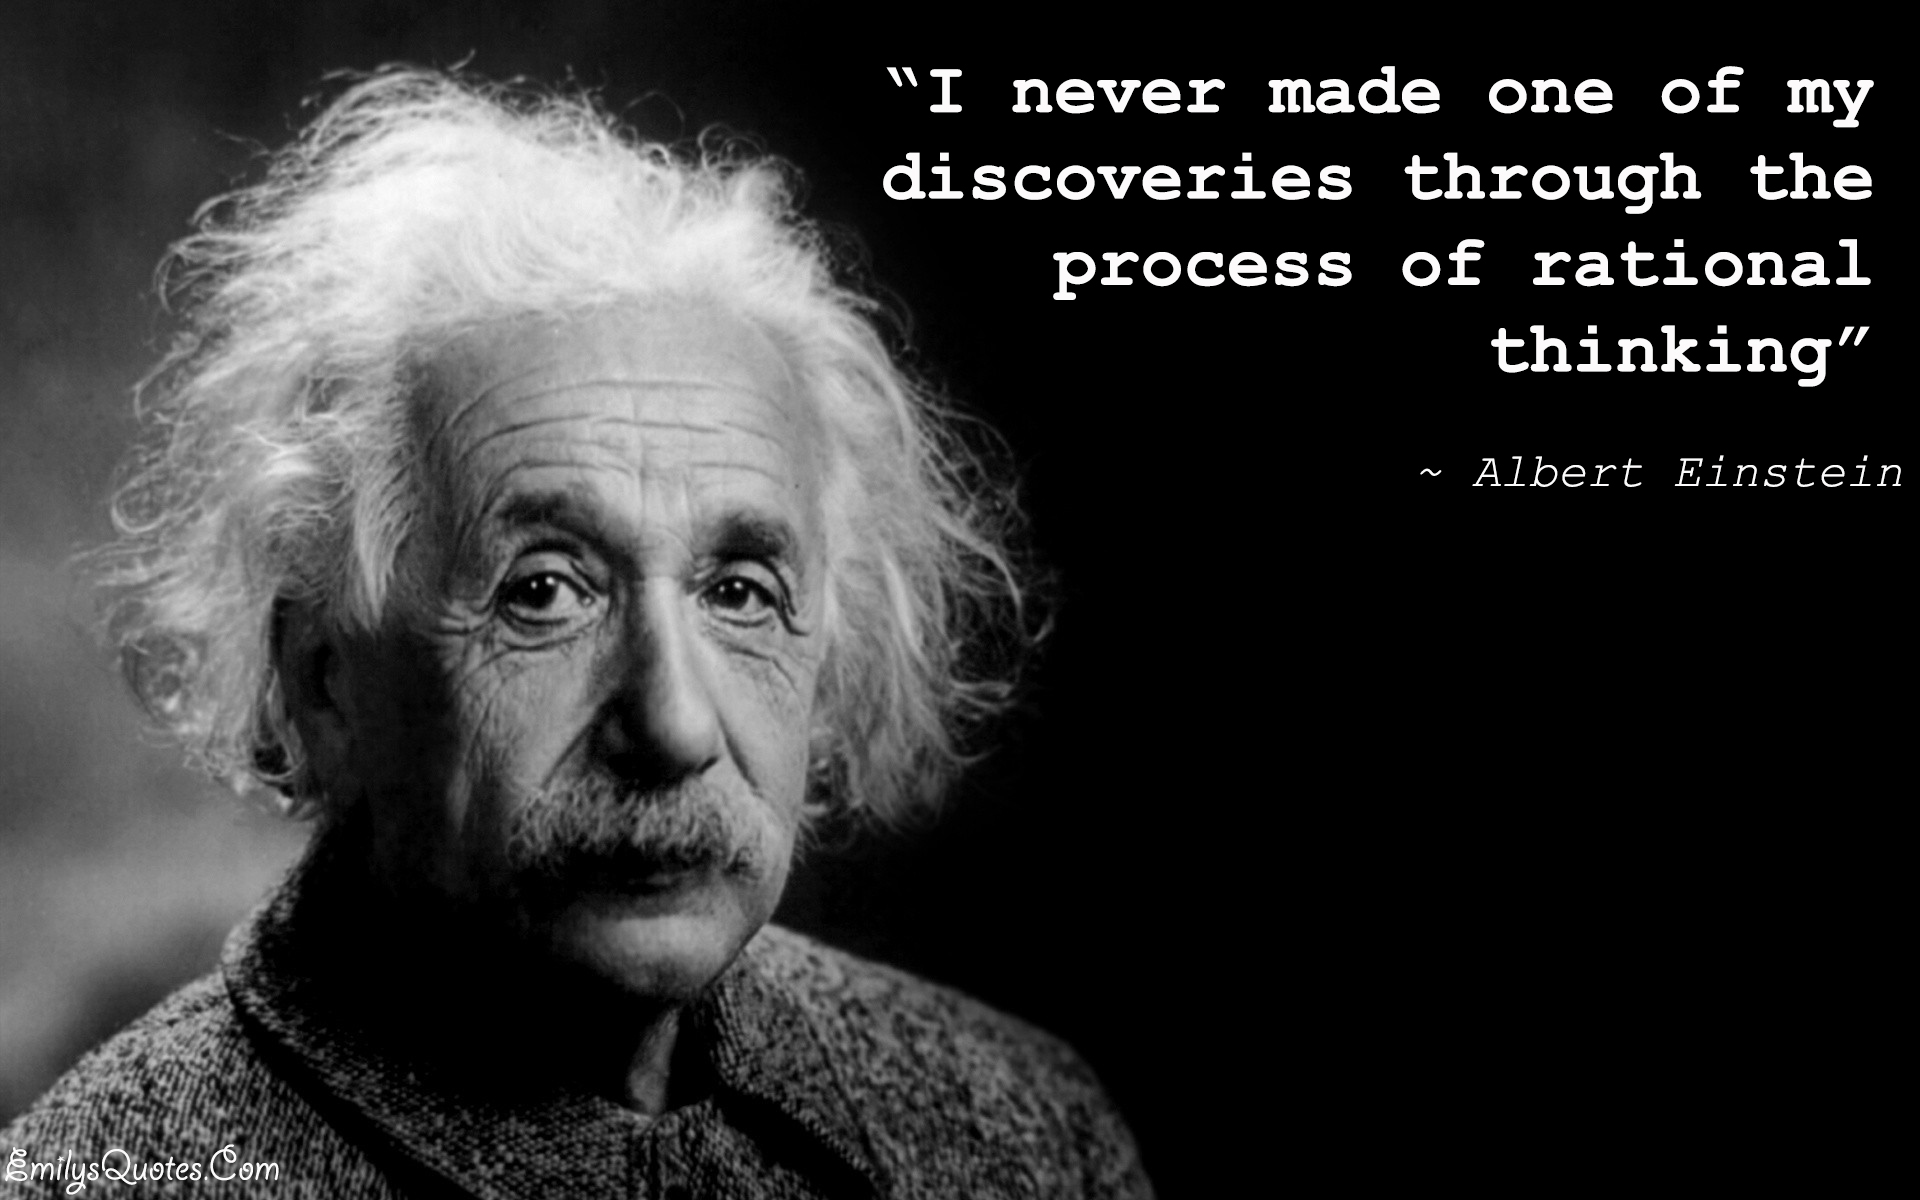 I never made one of my discoveries through the process of rational thinking